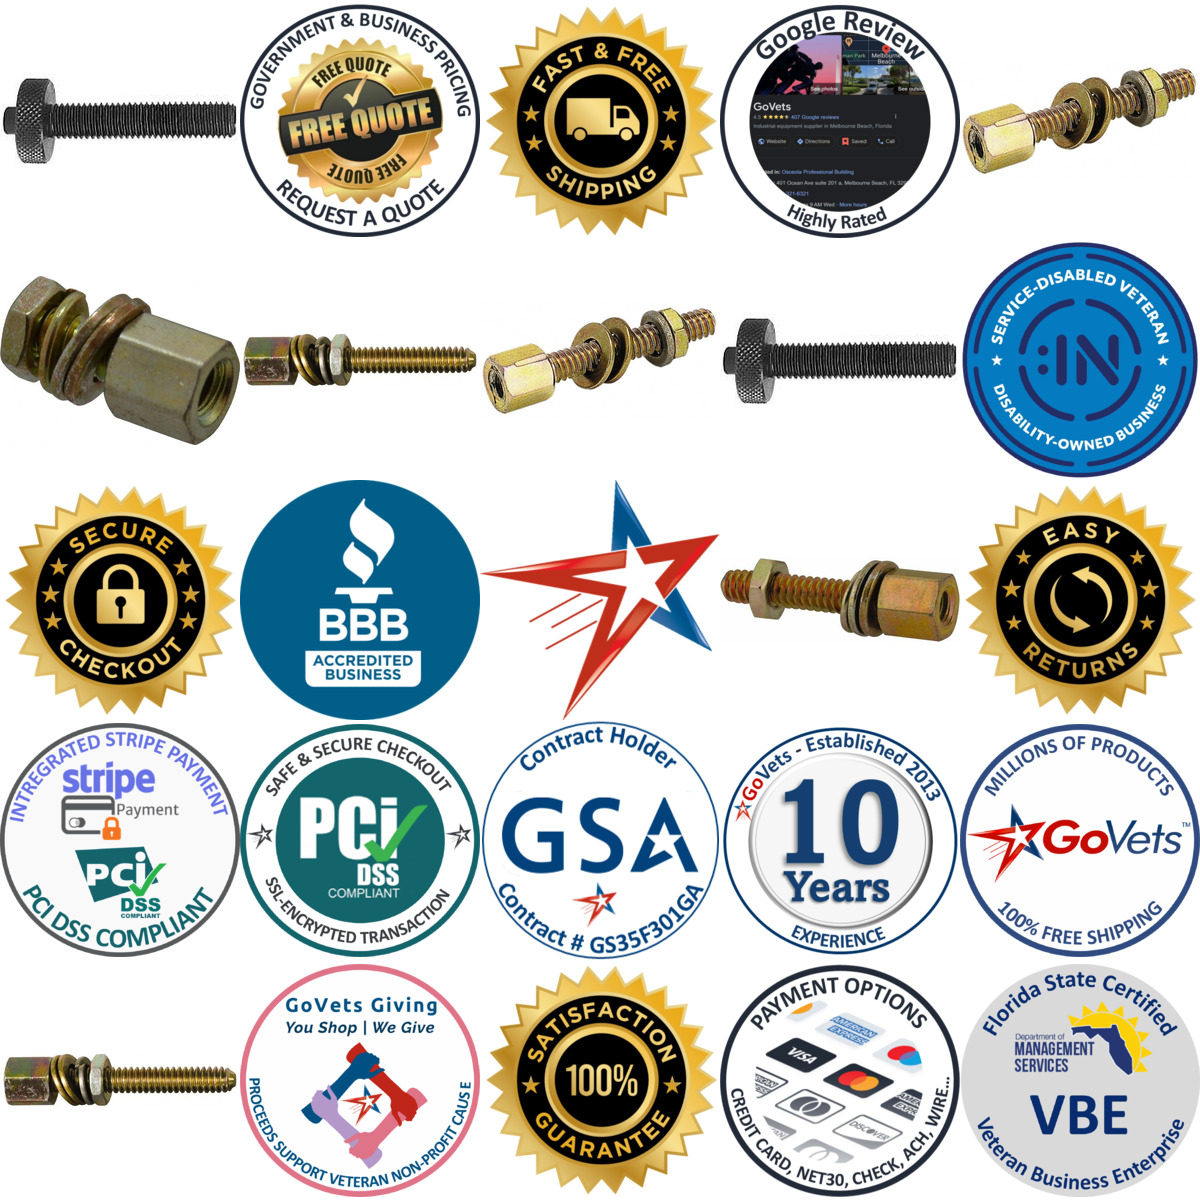 A selection of Jack Screws products on GoVets